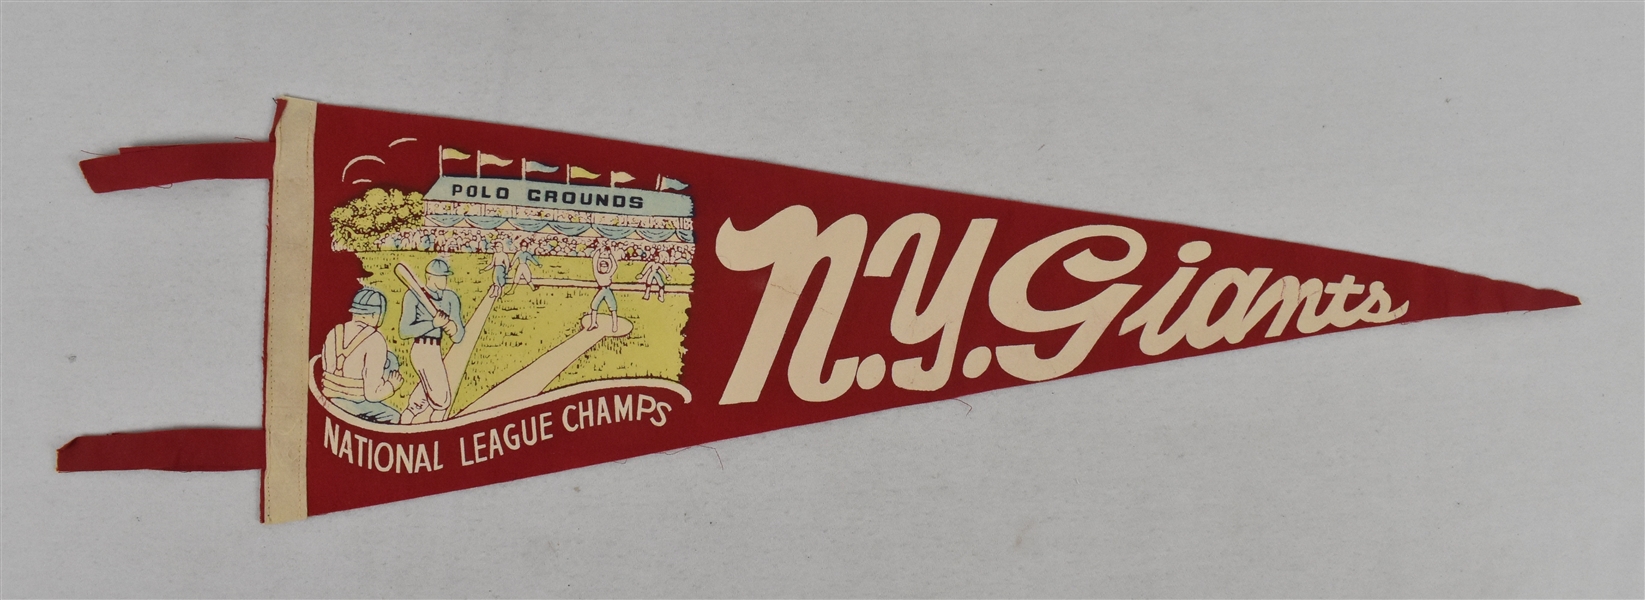 New York Giants National League Championship Pennant